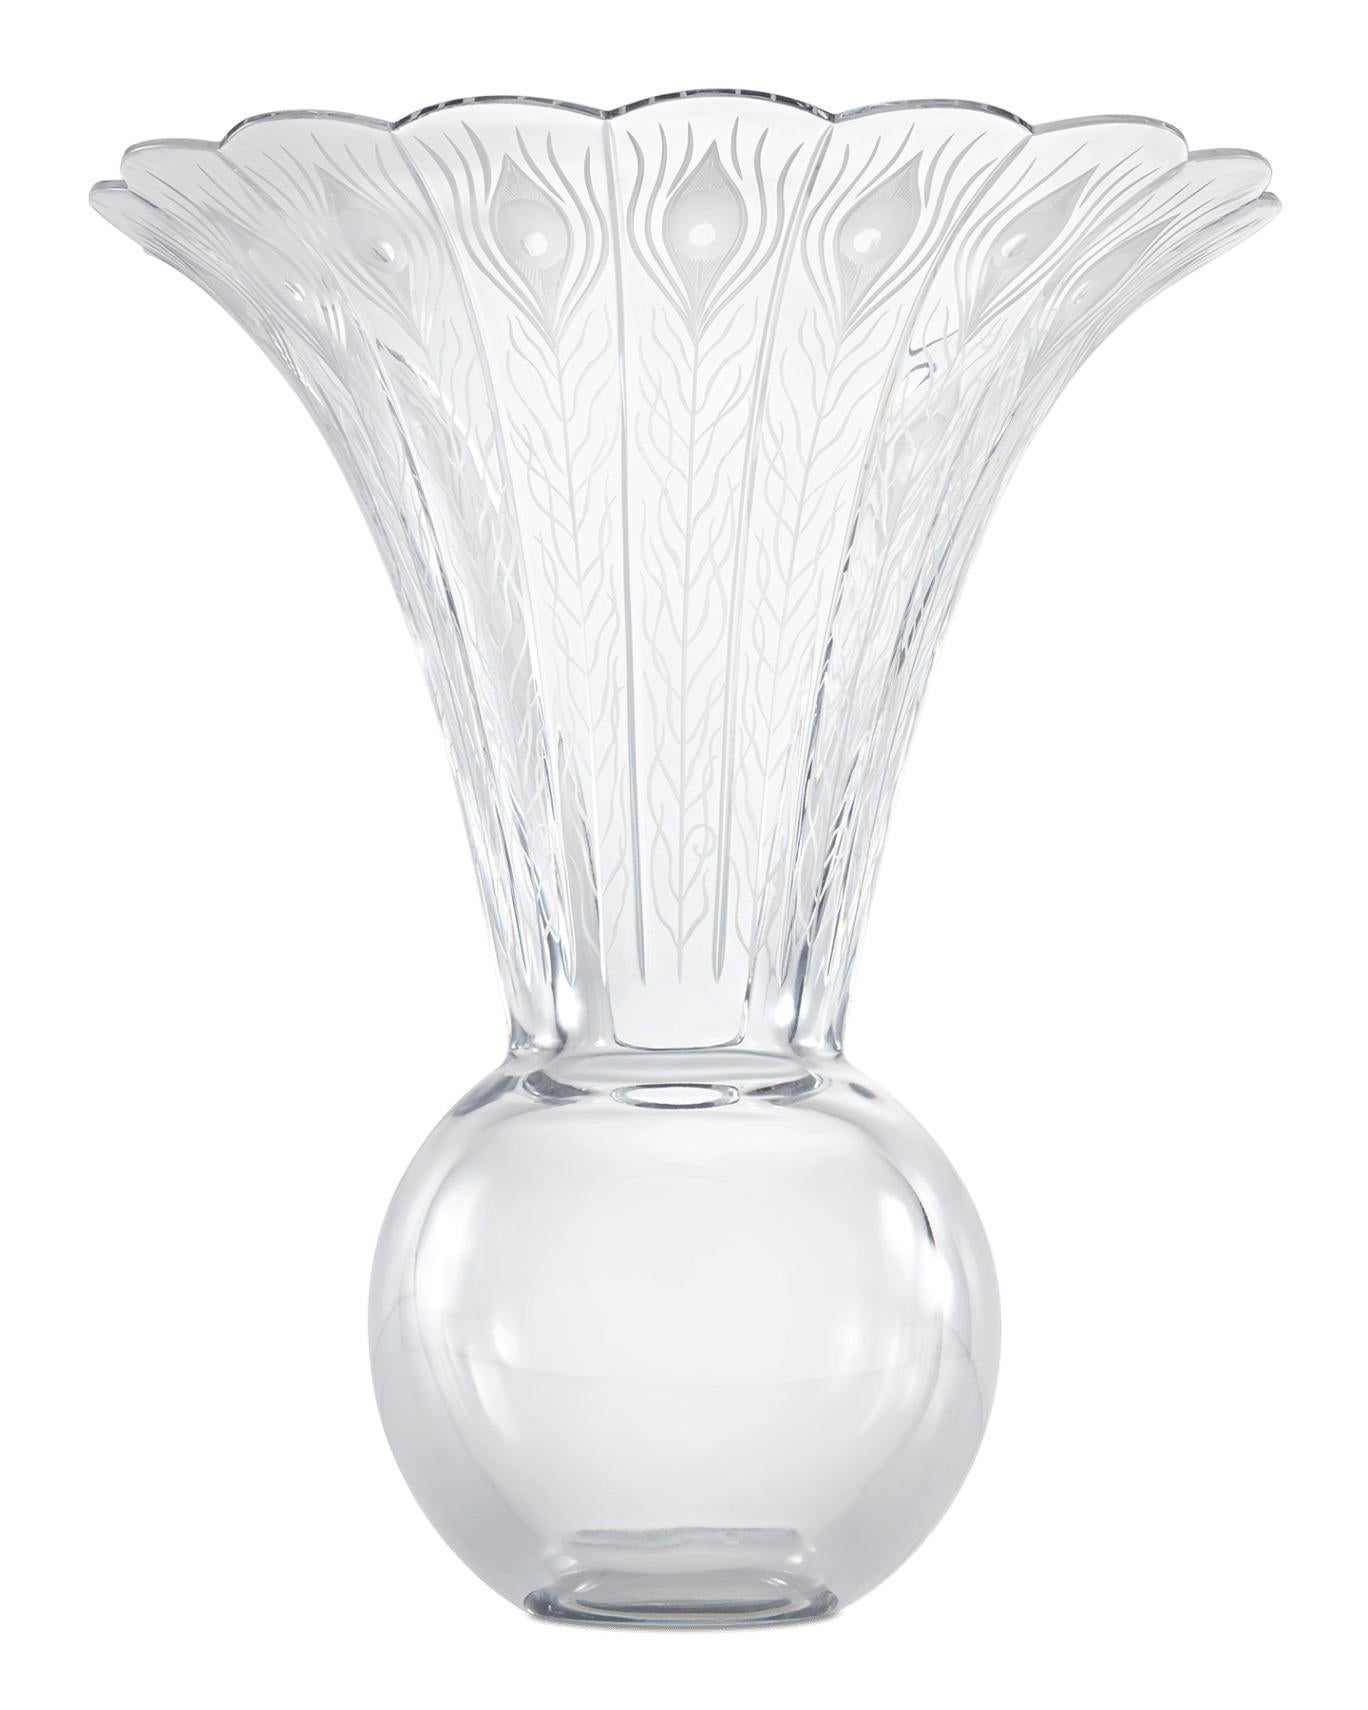 This rare and beautiful vase boasts the superb workmanship of famed French crystal firm Baccarat. The design takes the abstract form of a peacock, featuring a long neck which flares to a flute, etched with the pattern of peacock feathers. A round,